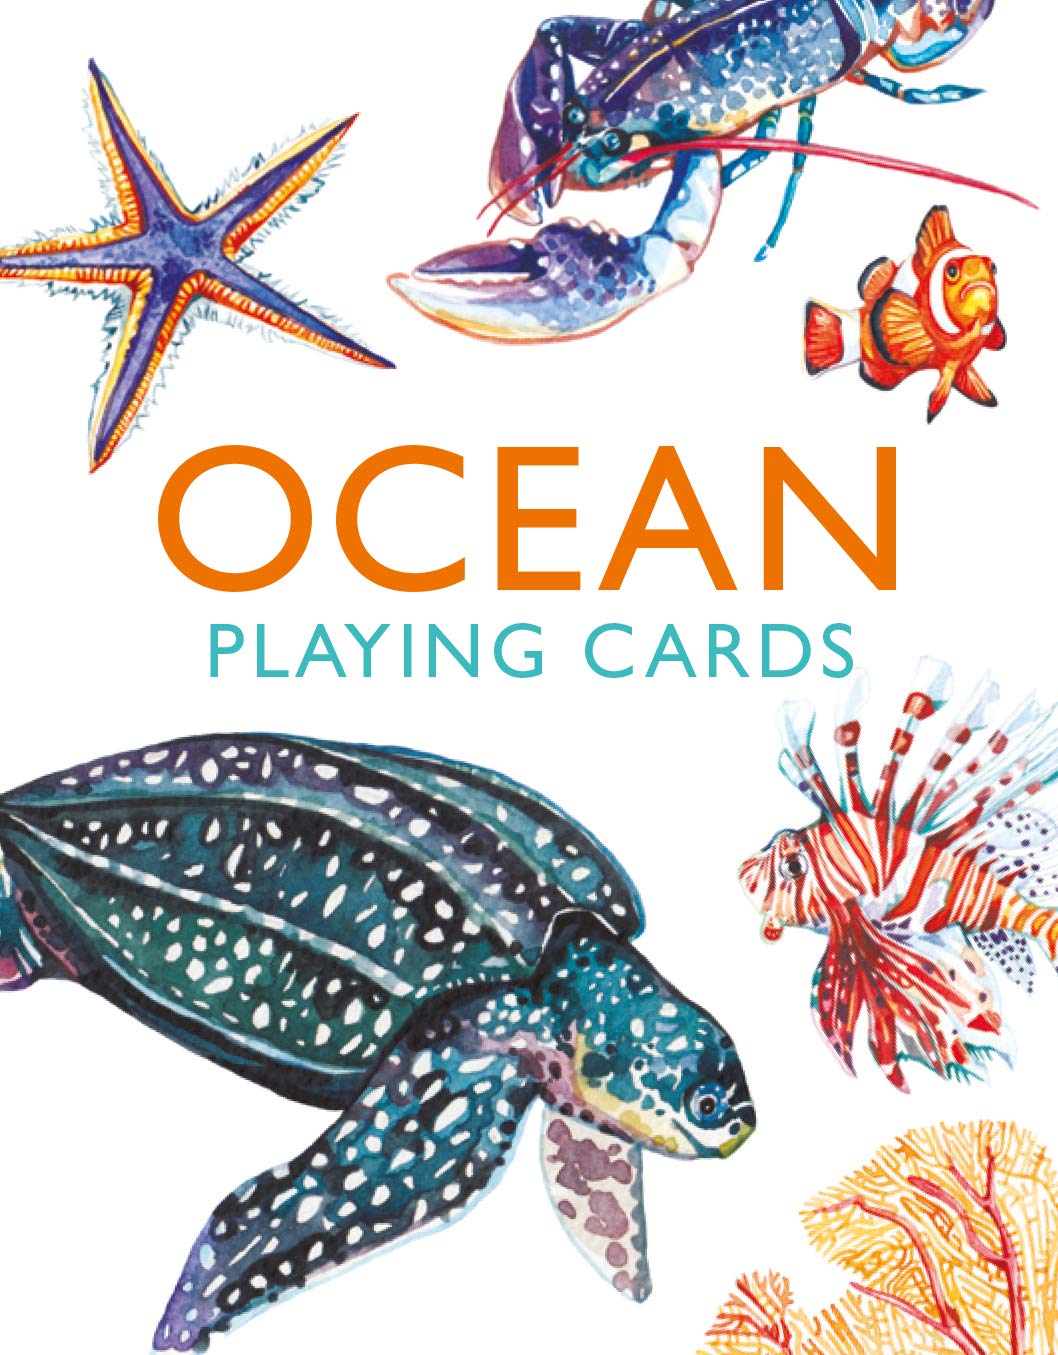 Ocean Playing Cards |  image7